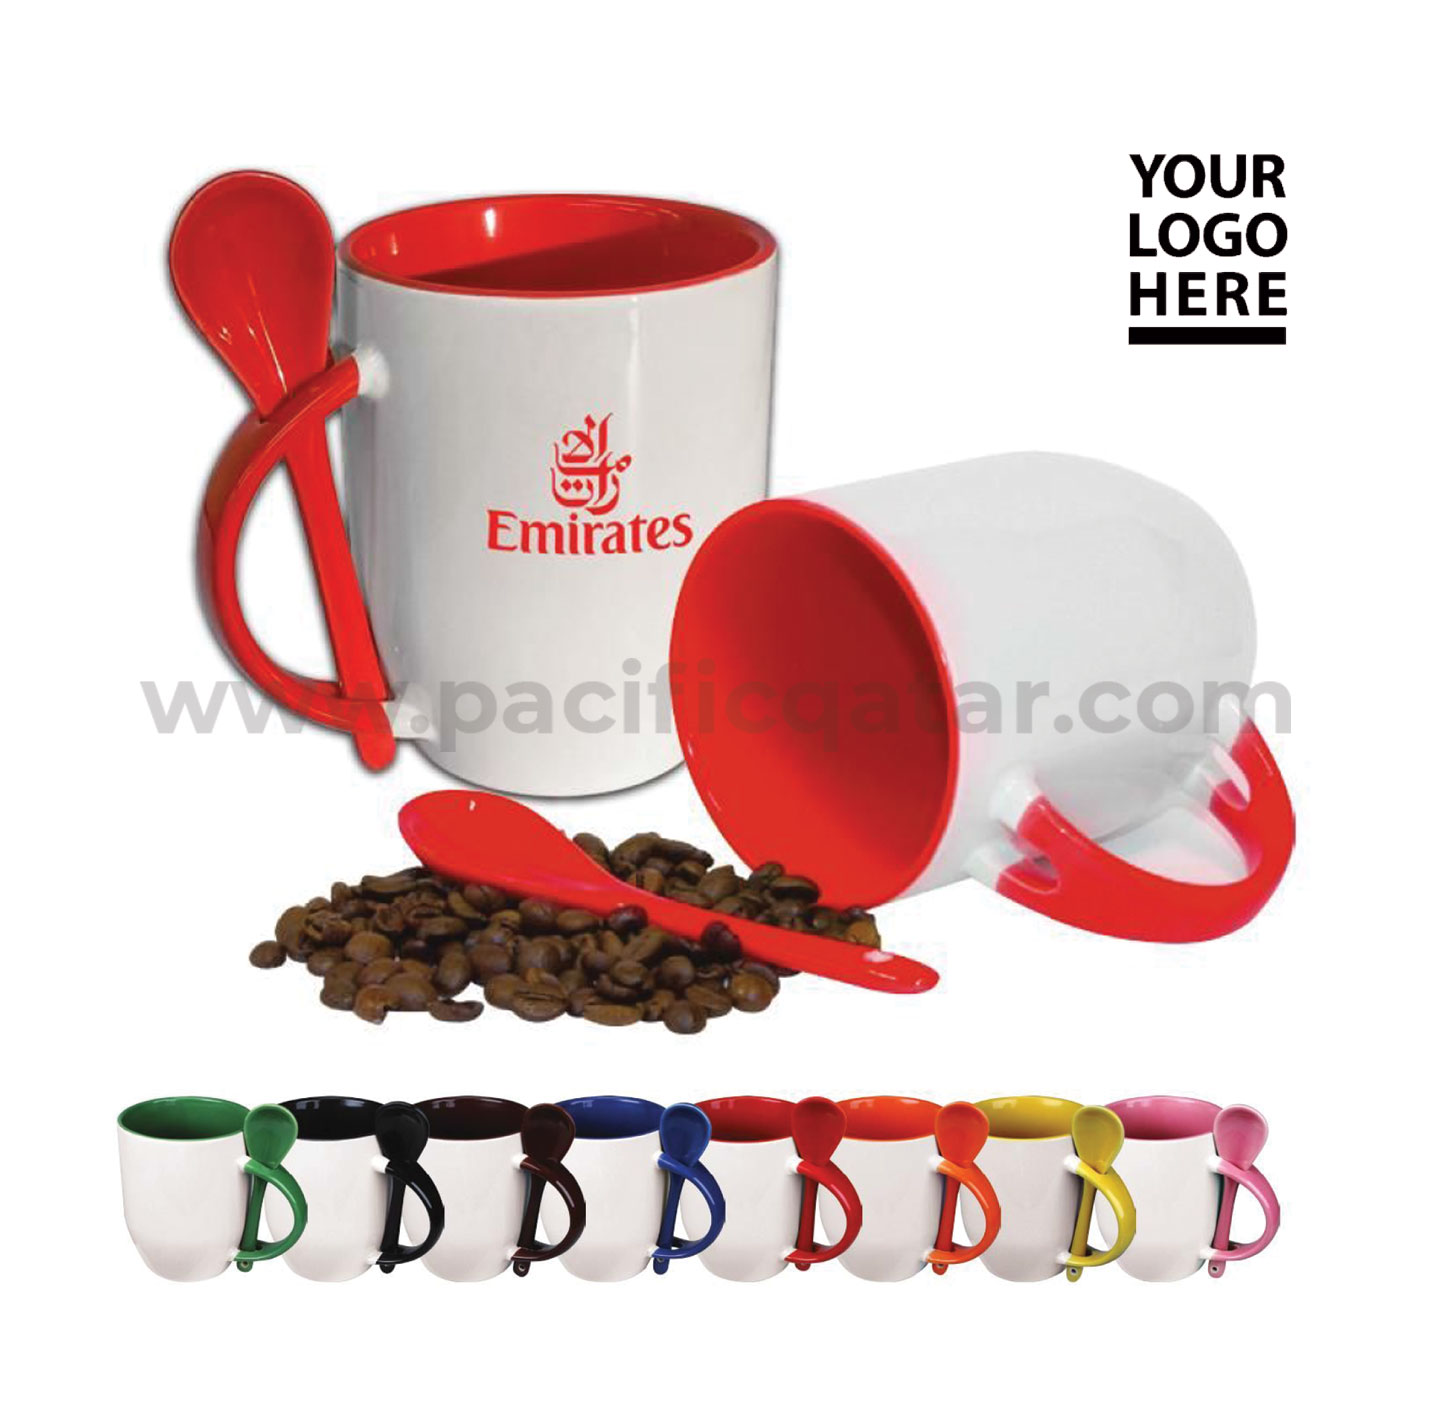 Red and white color Mug with Spoon